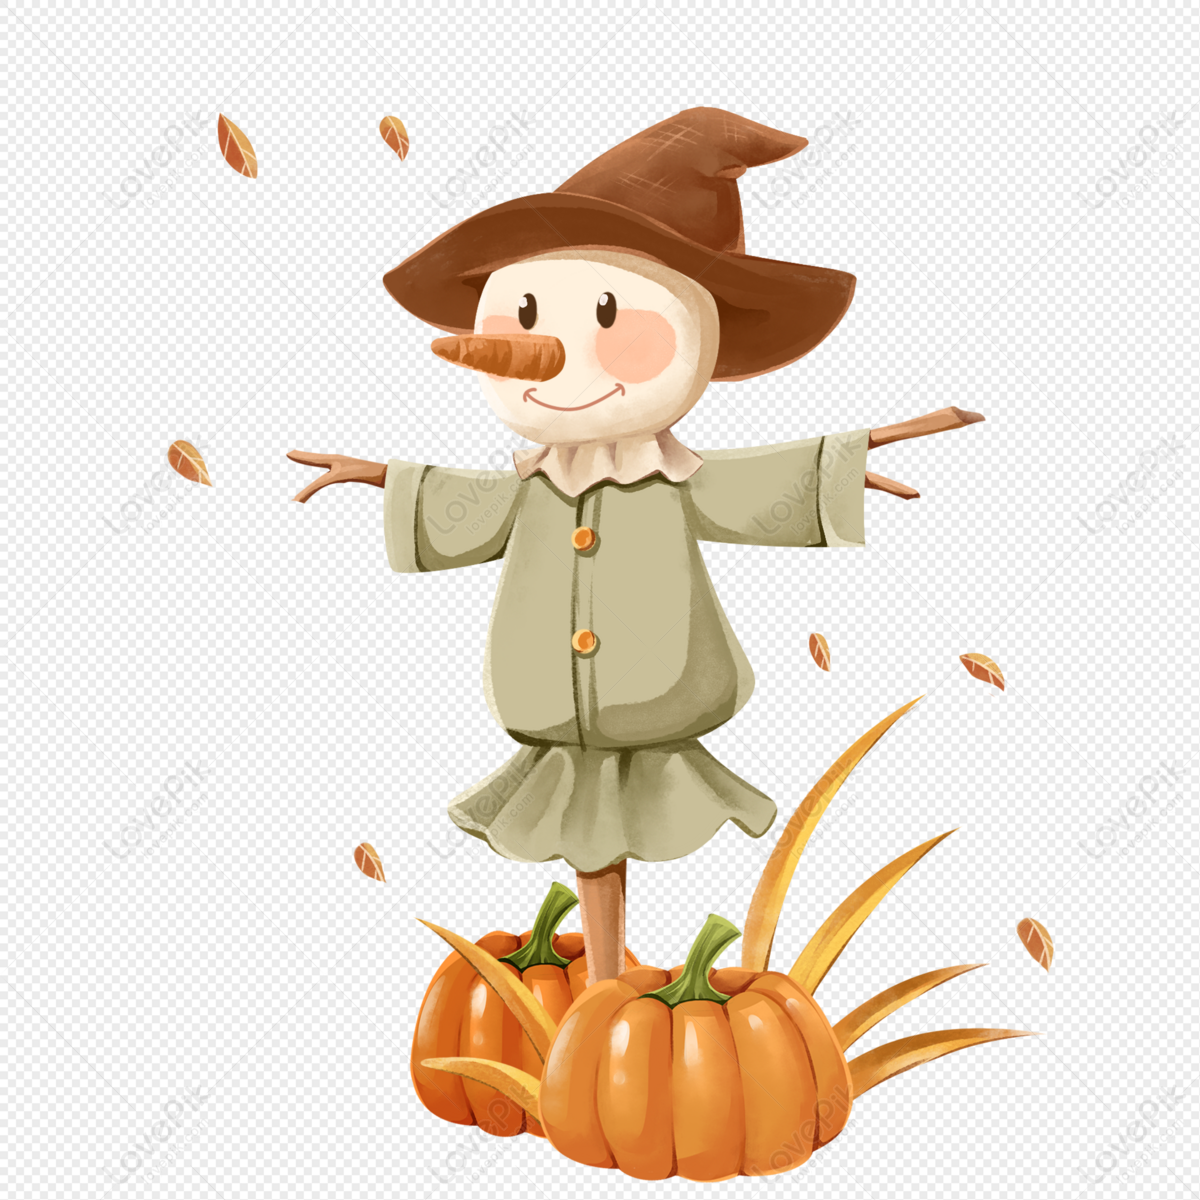 lovepik-scarecrow-in-autumn-png-image_401804653_wh1200.png